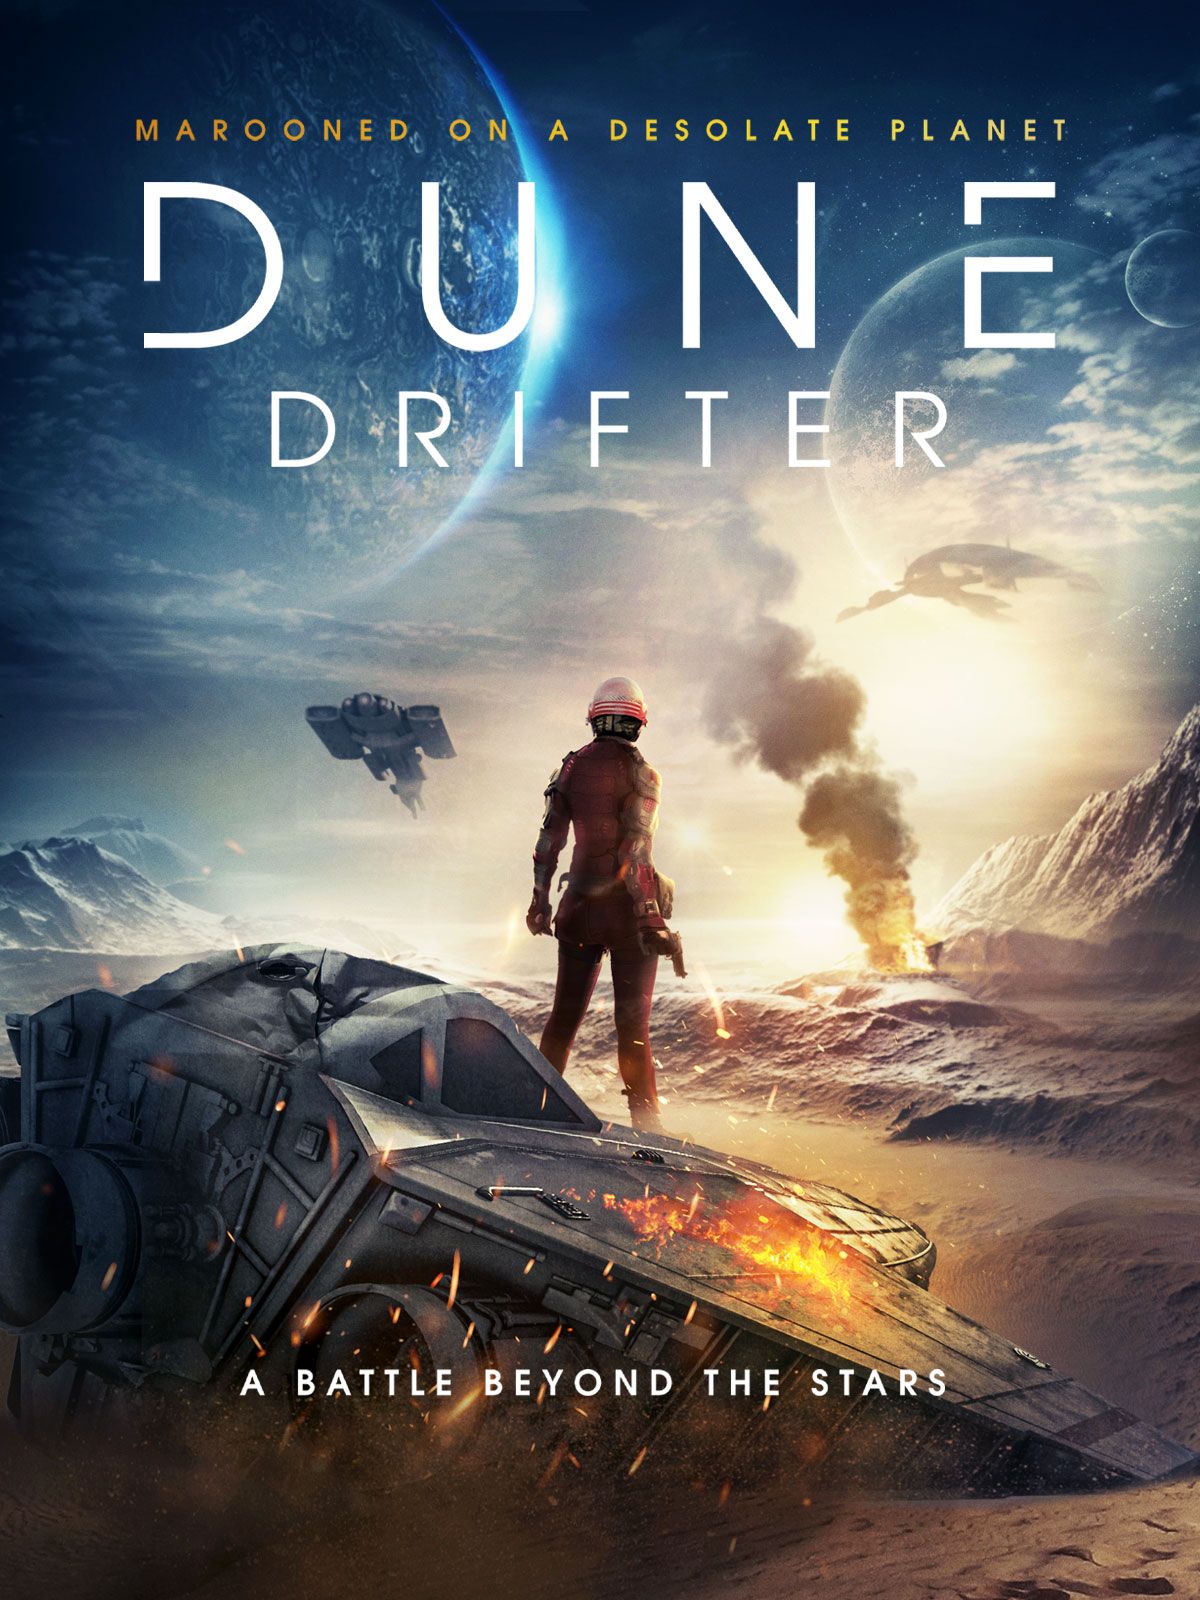 Dune Drifter (2020) Film Review: Movie Completionist #009